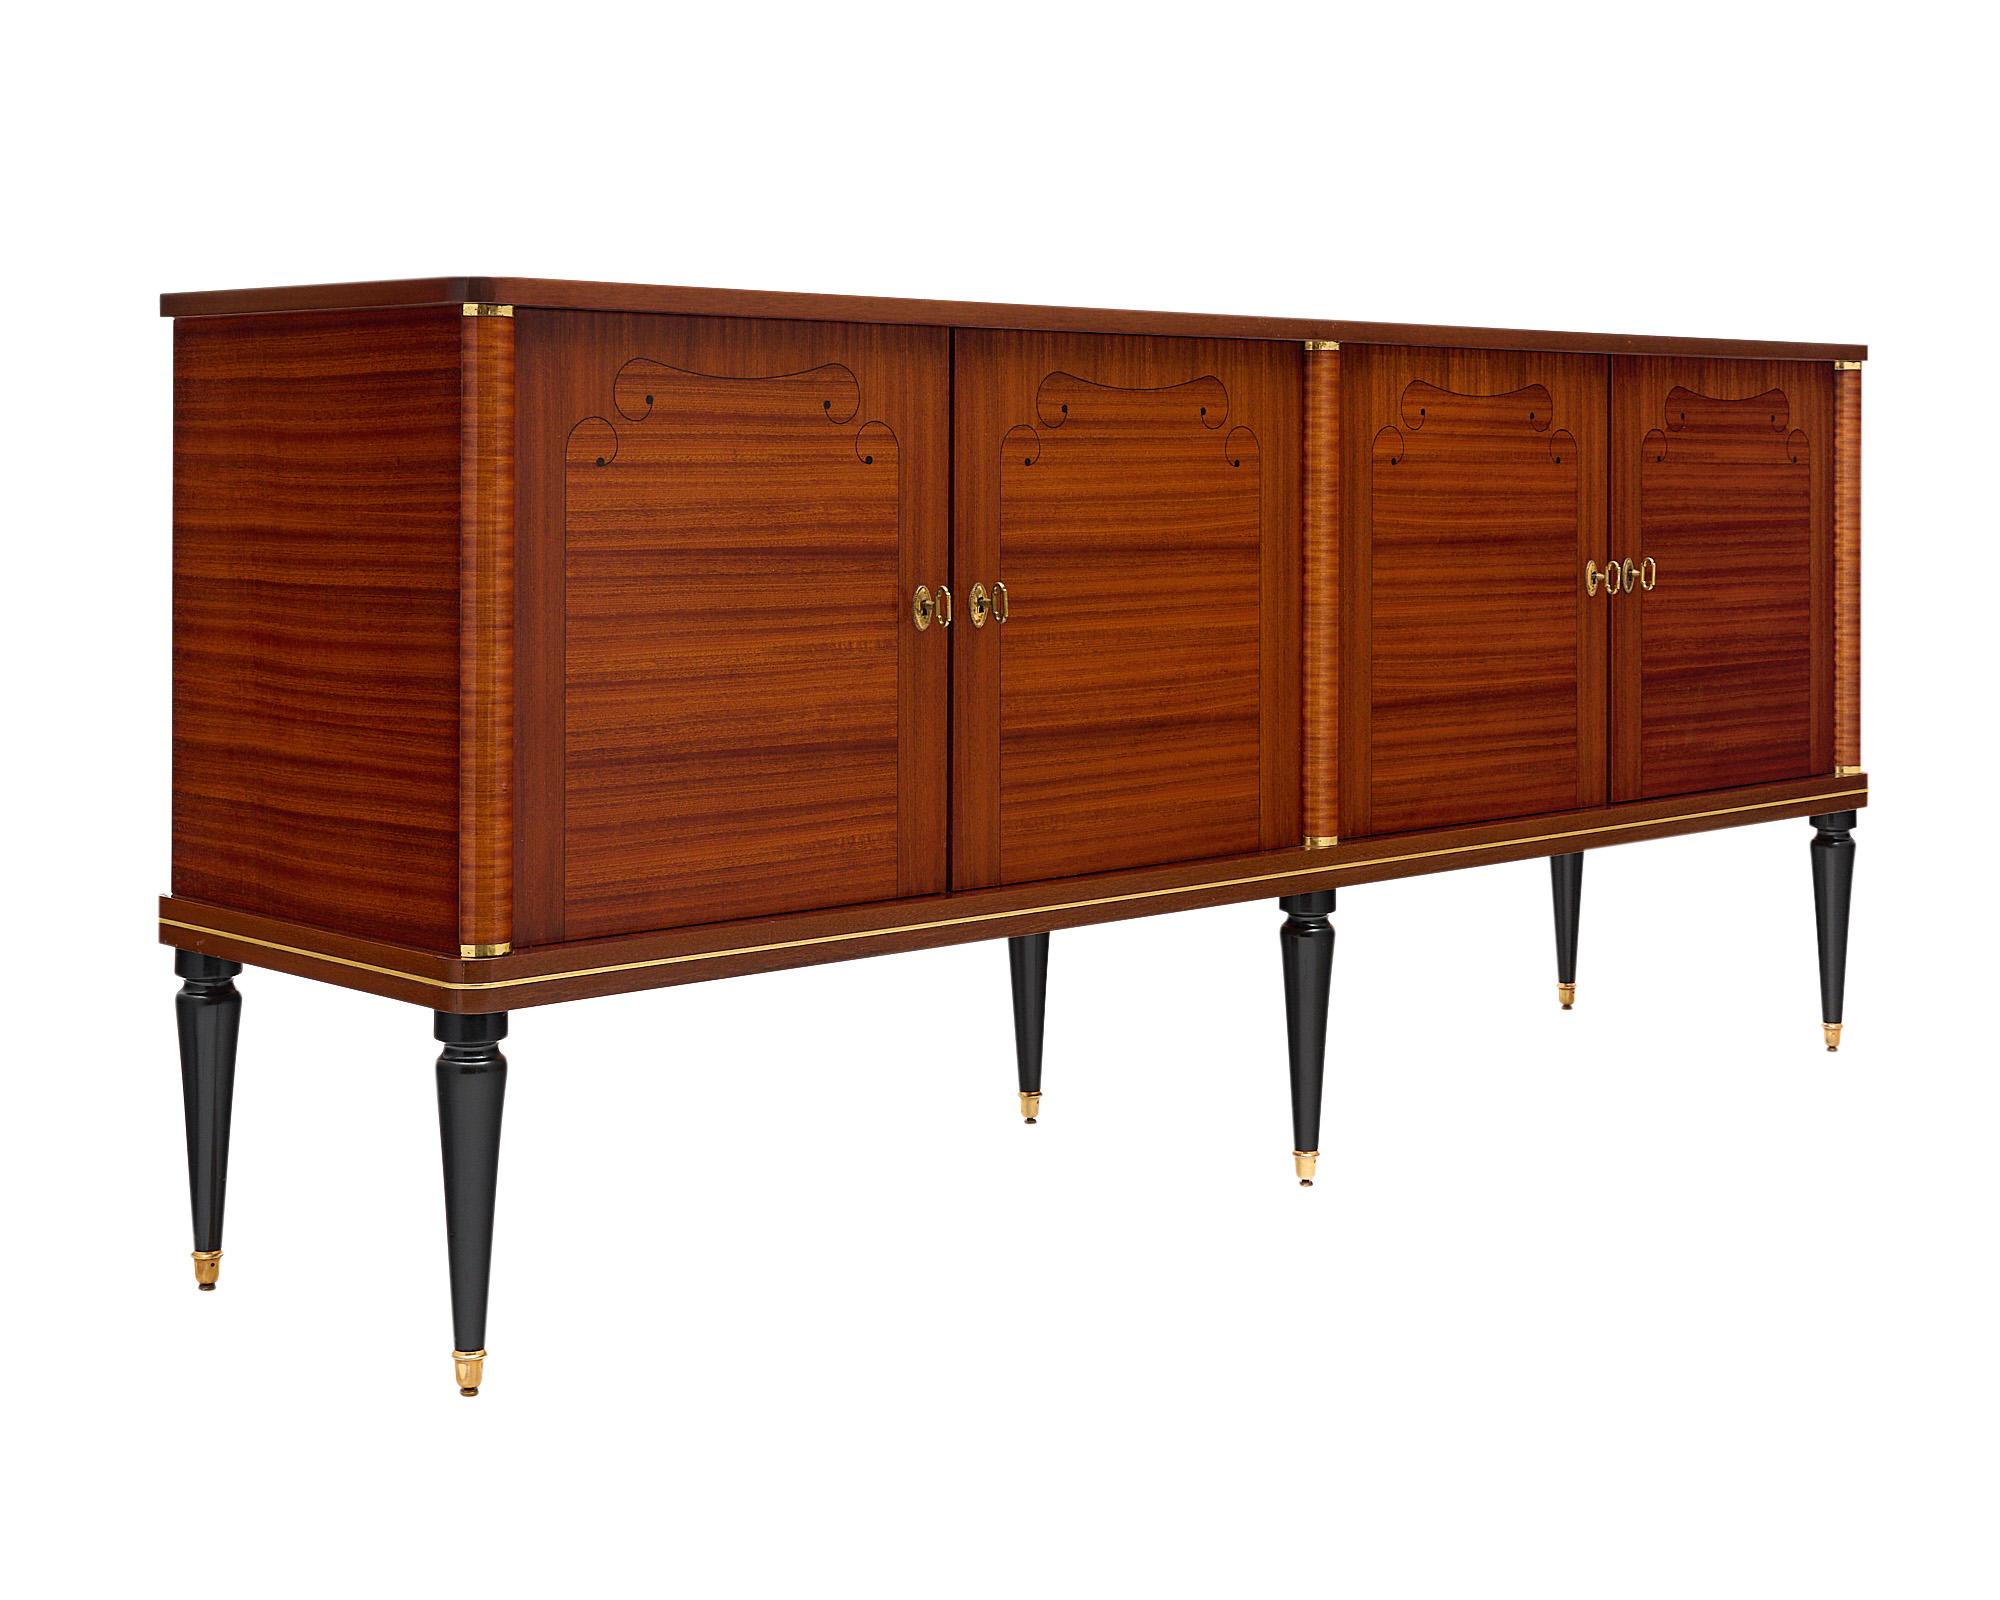 Buffet/enfilade, Italian, made of rosewood and burled rosewood, adorned with a delicate ebony inlay. The credenza features three half columns with brass hardware and fine trims throughout. The four doors open up to a satinwood interior with